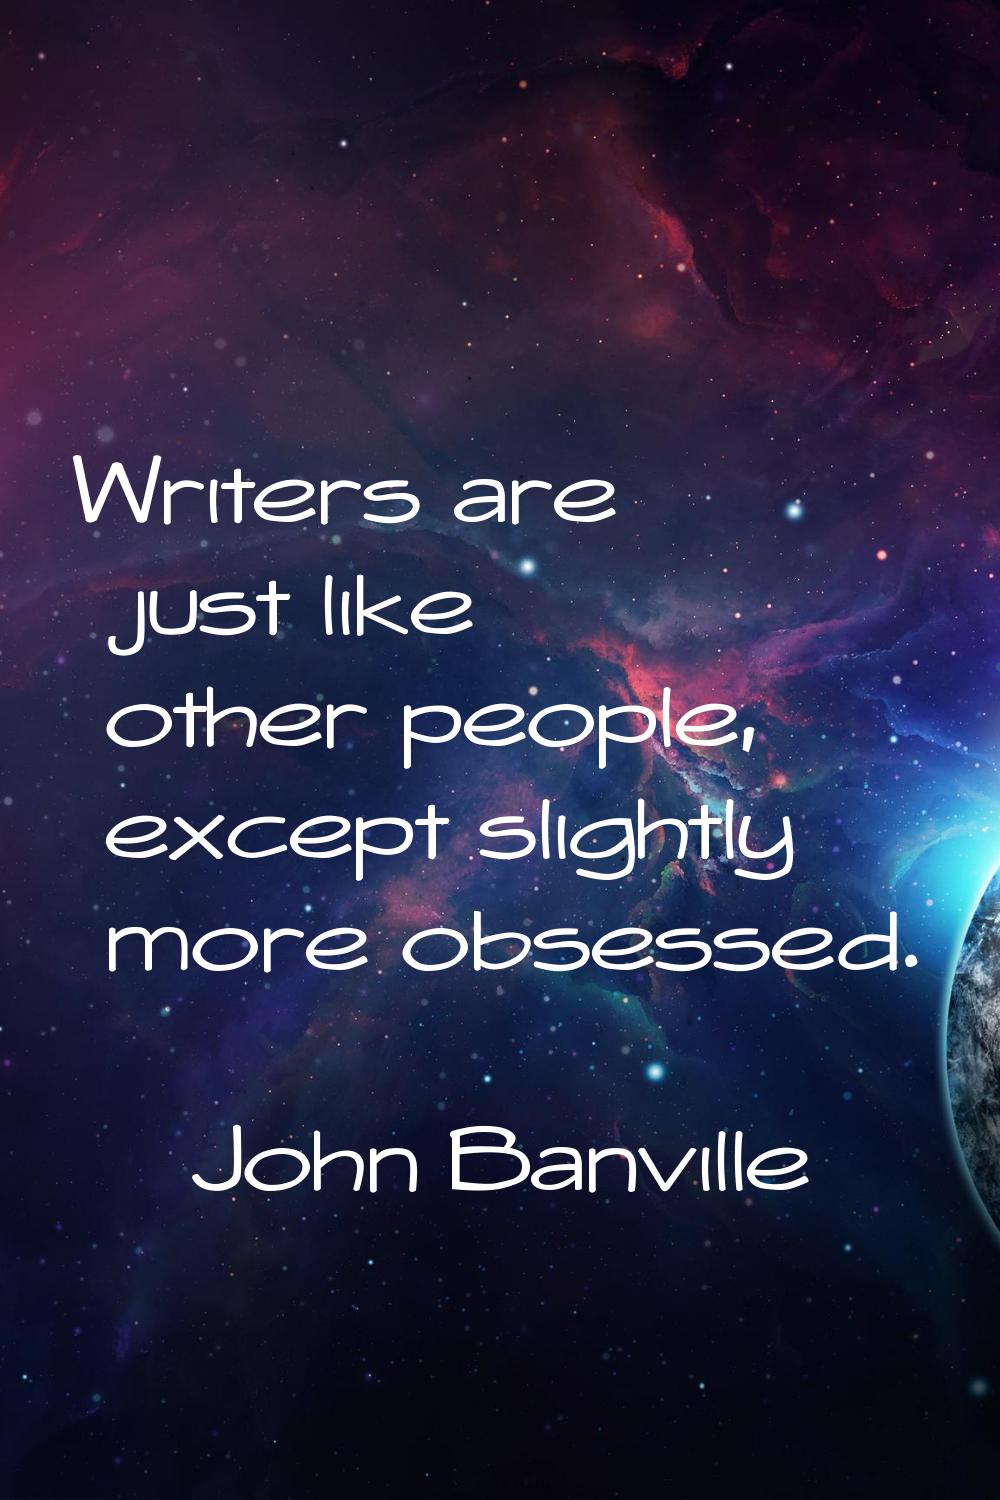 Writers are just like other people, except slightly more obsessed.